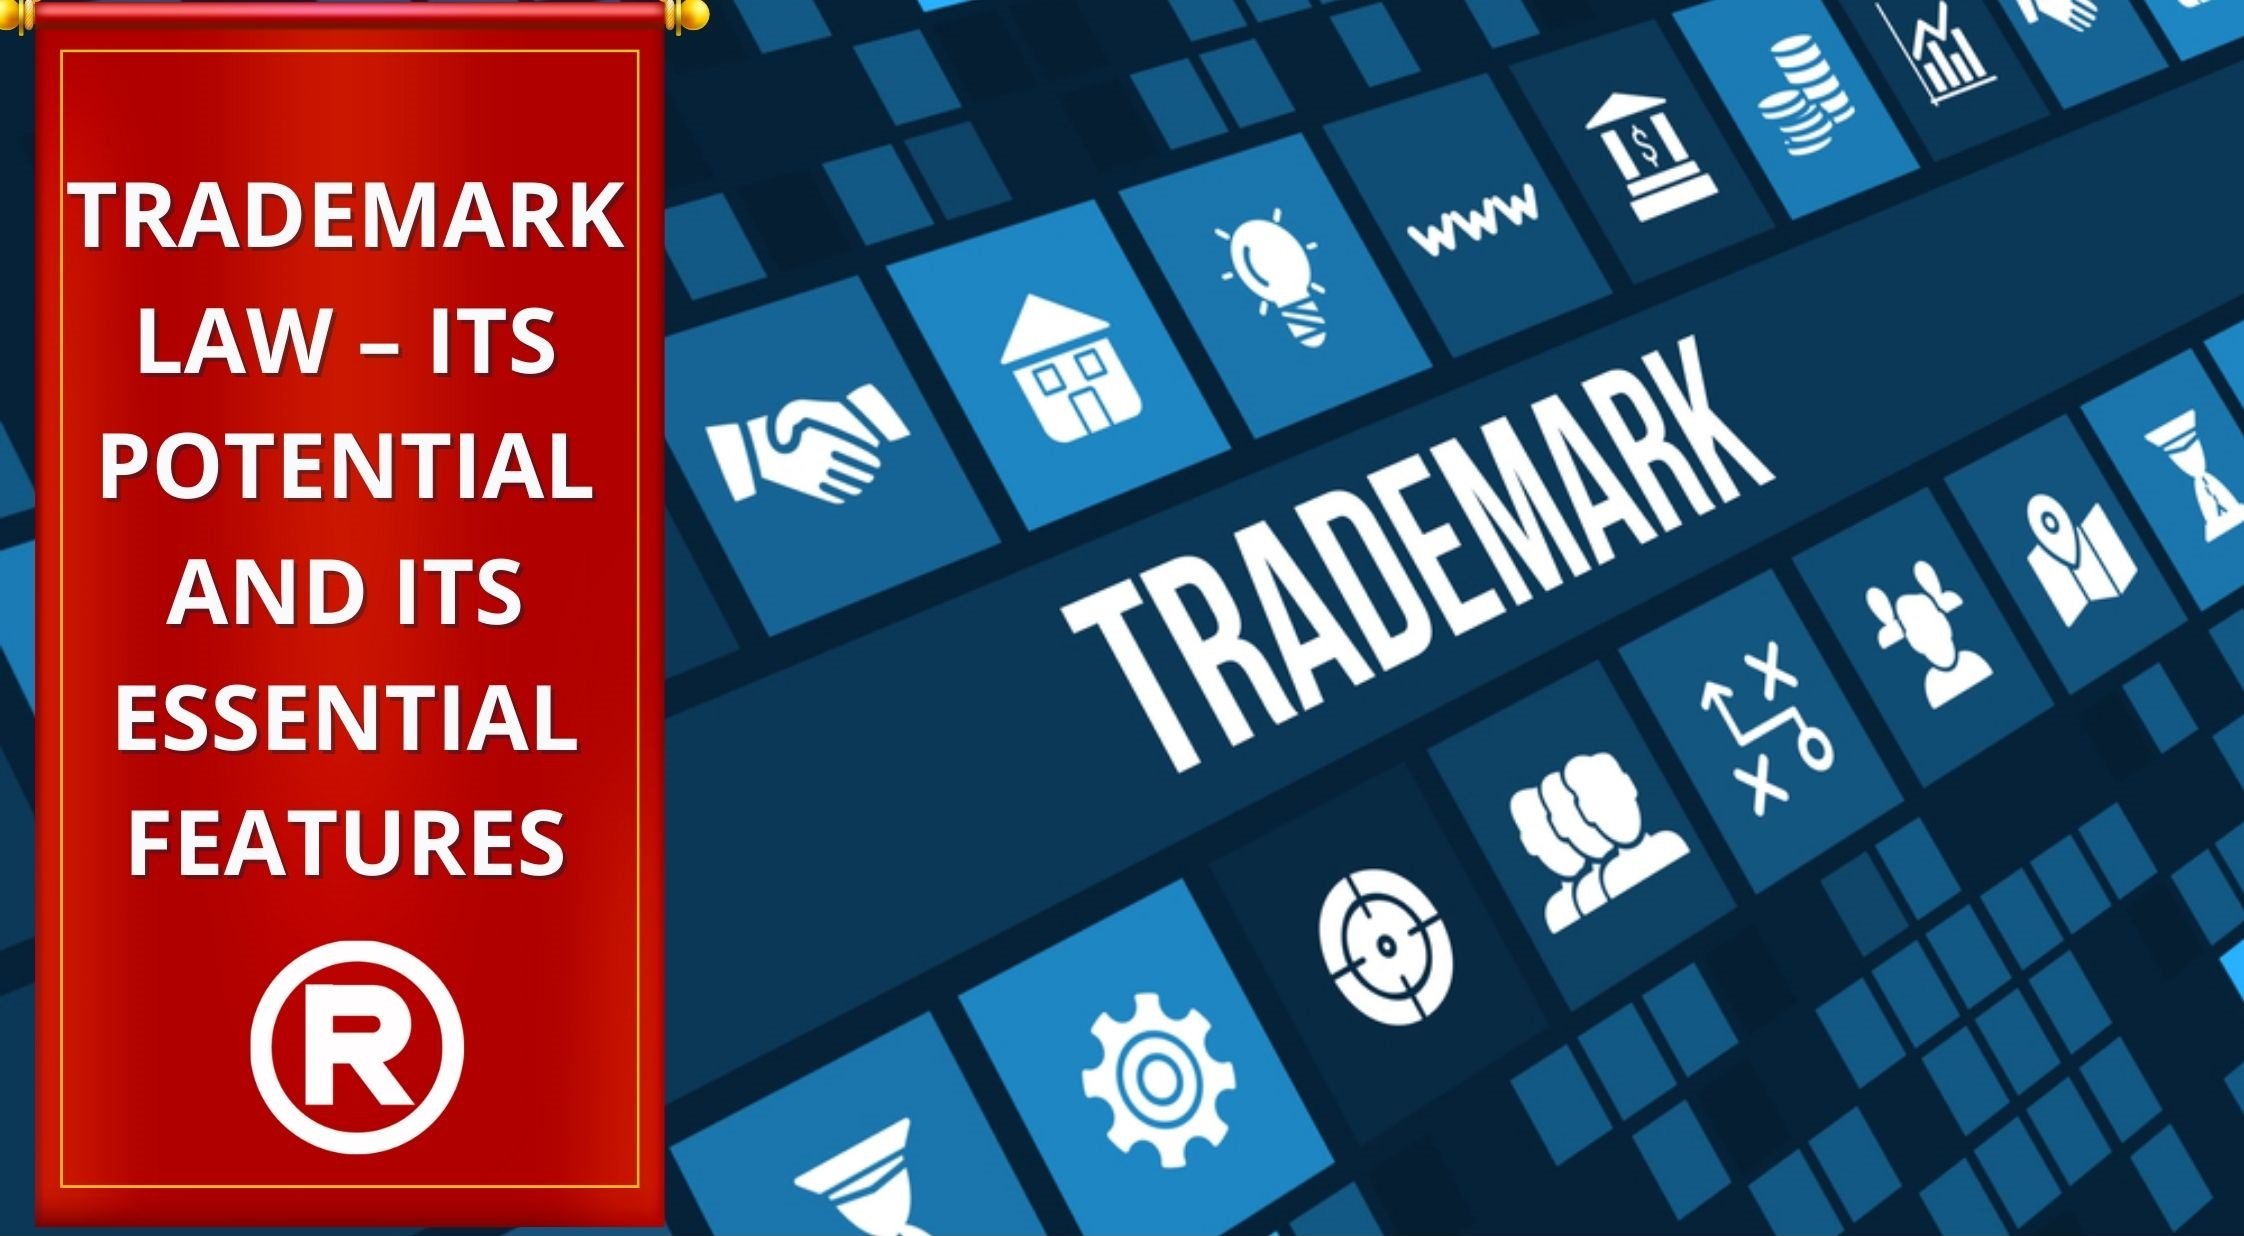 TRADEMARK LAW – ITS POTENTIAL AND ITS ESSENTIAL FEATURES